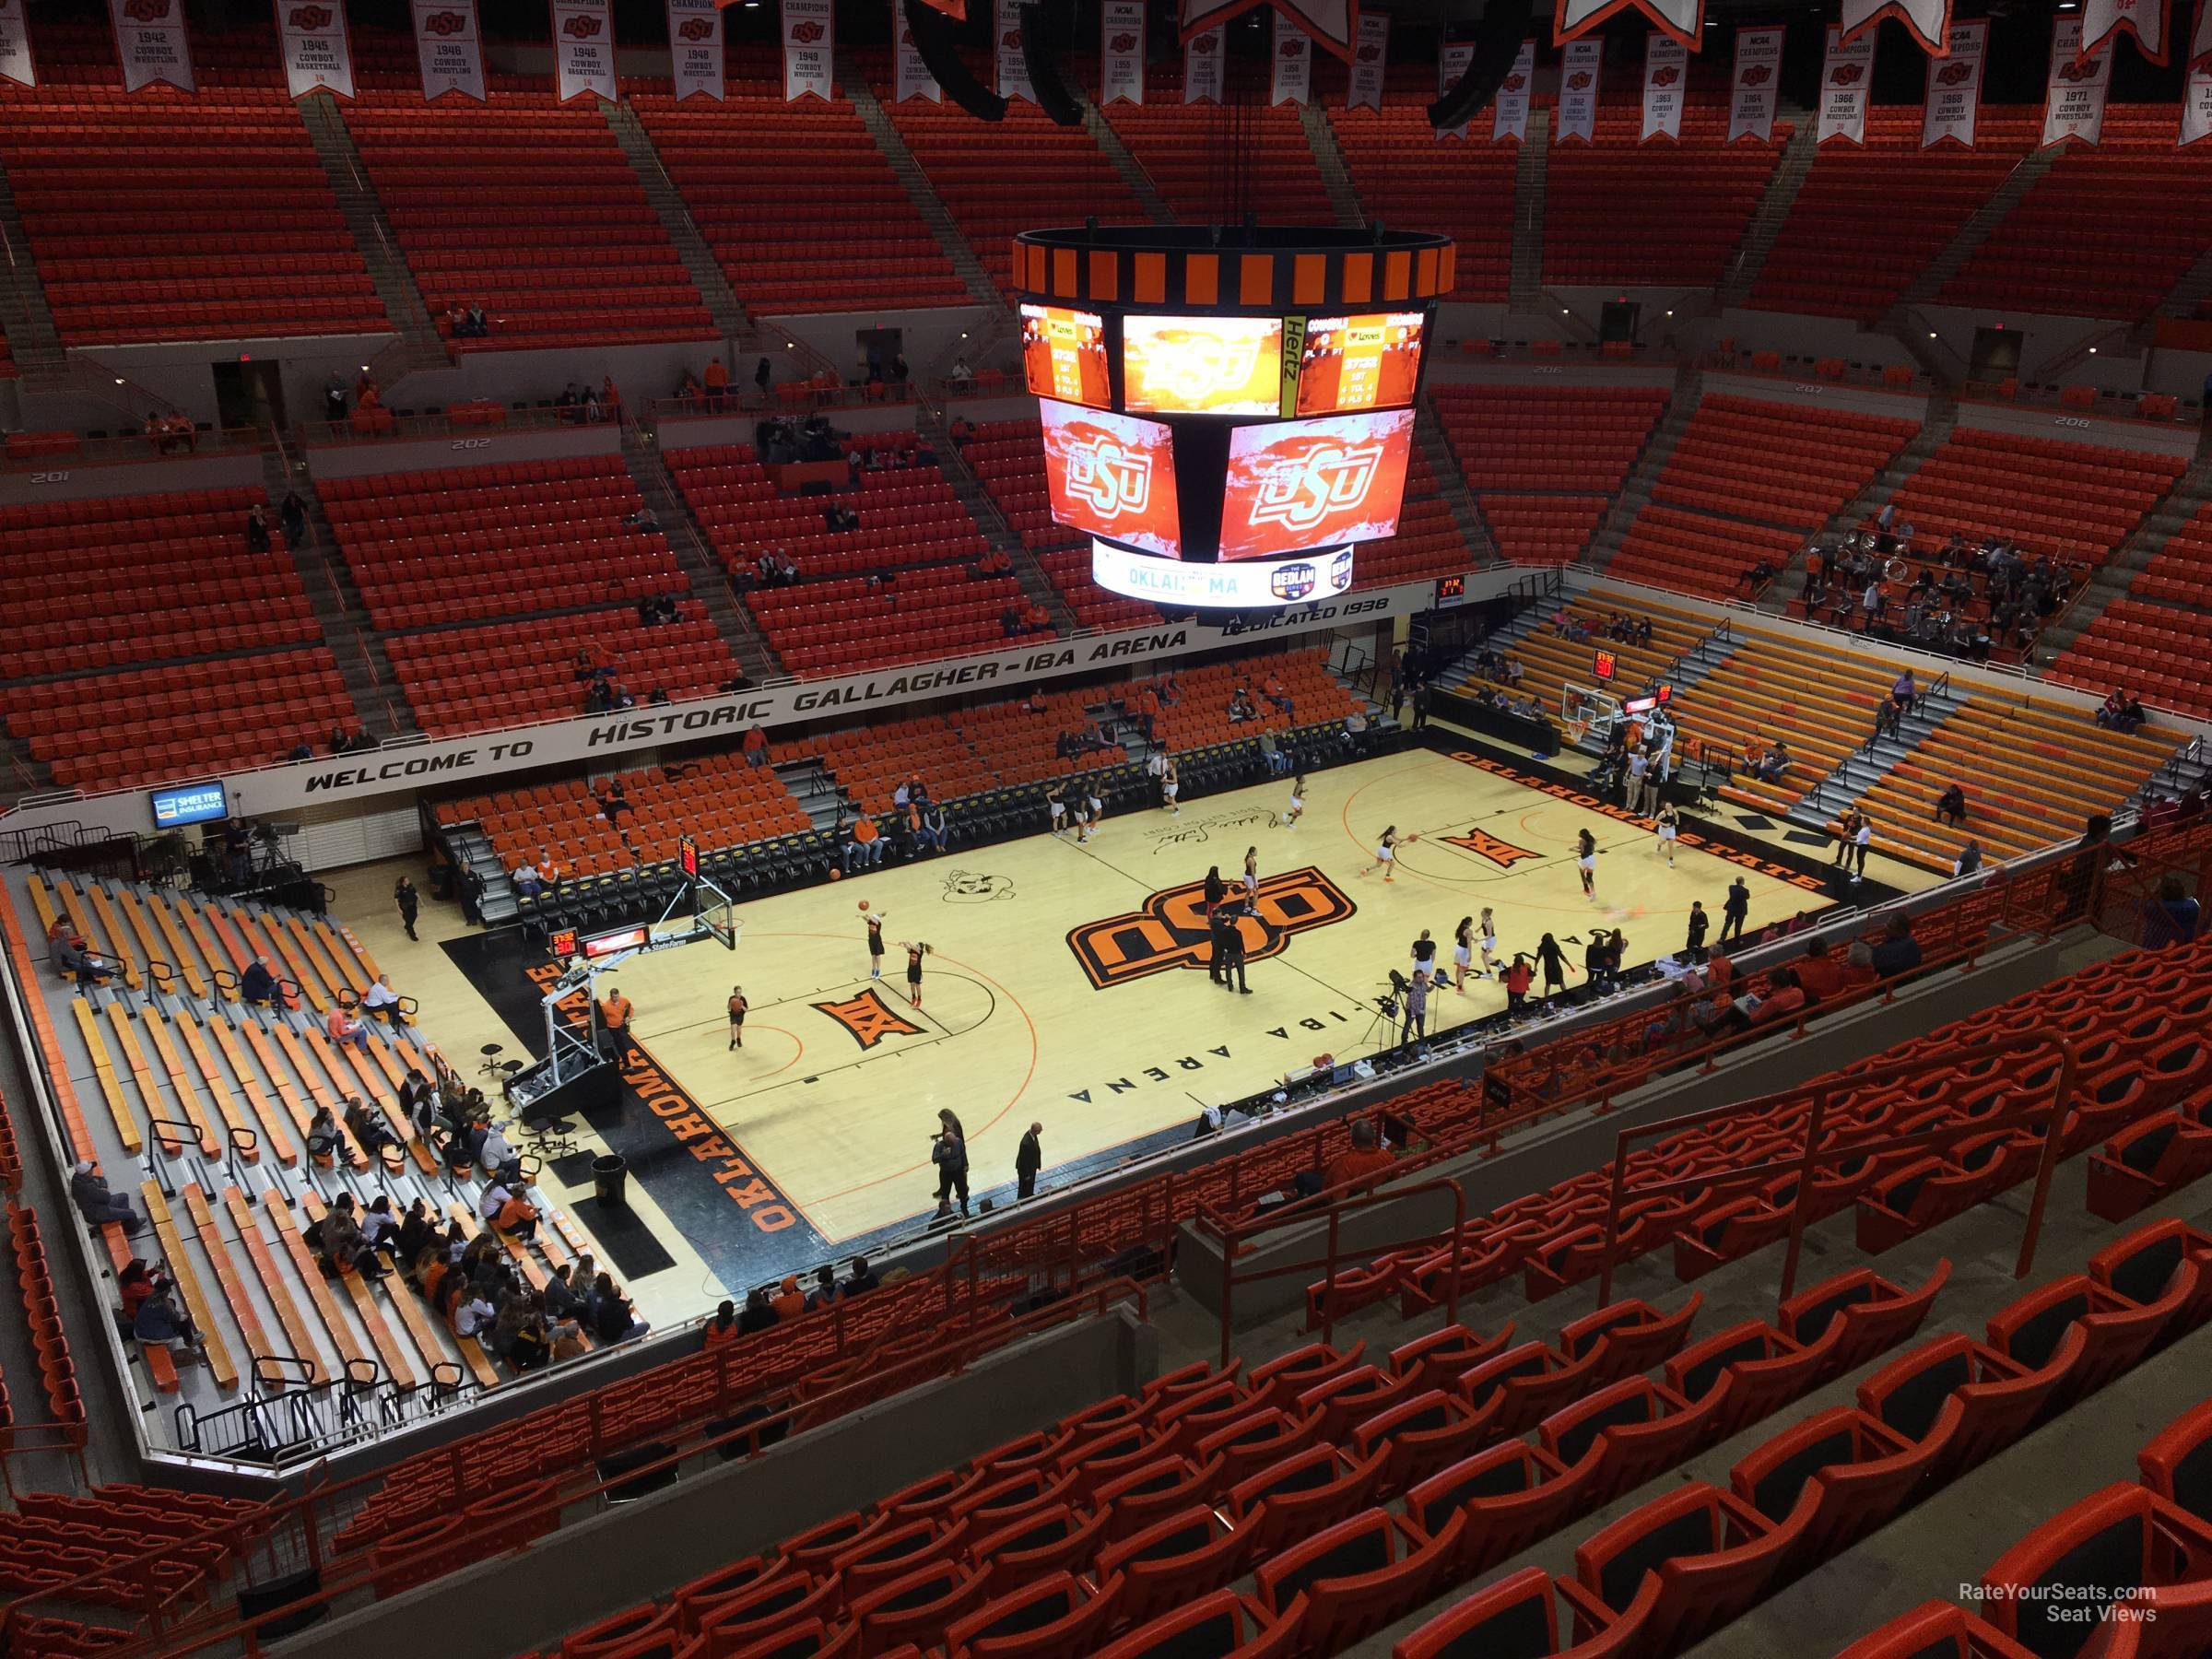 section 320, row 10 seat view  - gallagher-iba arena